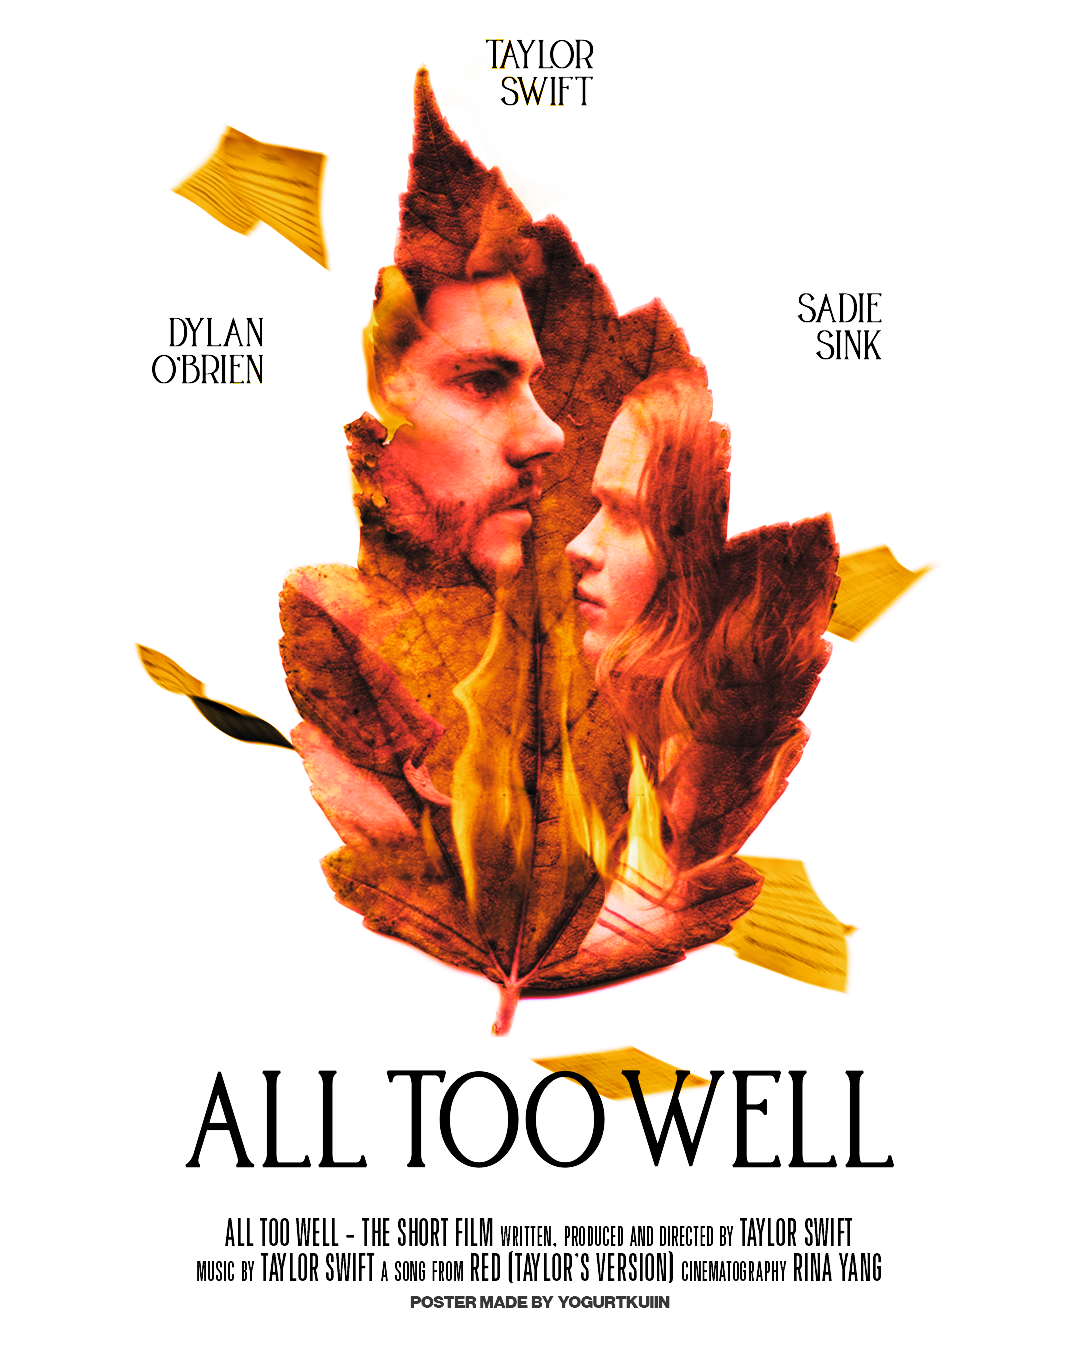 All too well short film